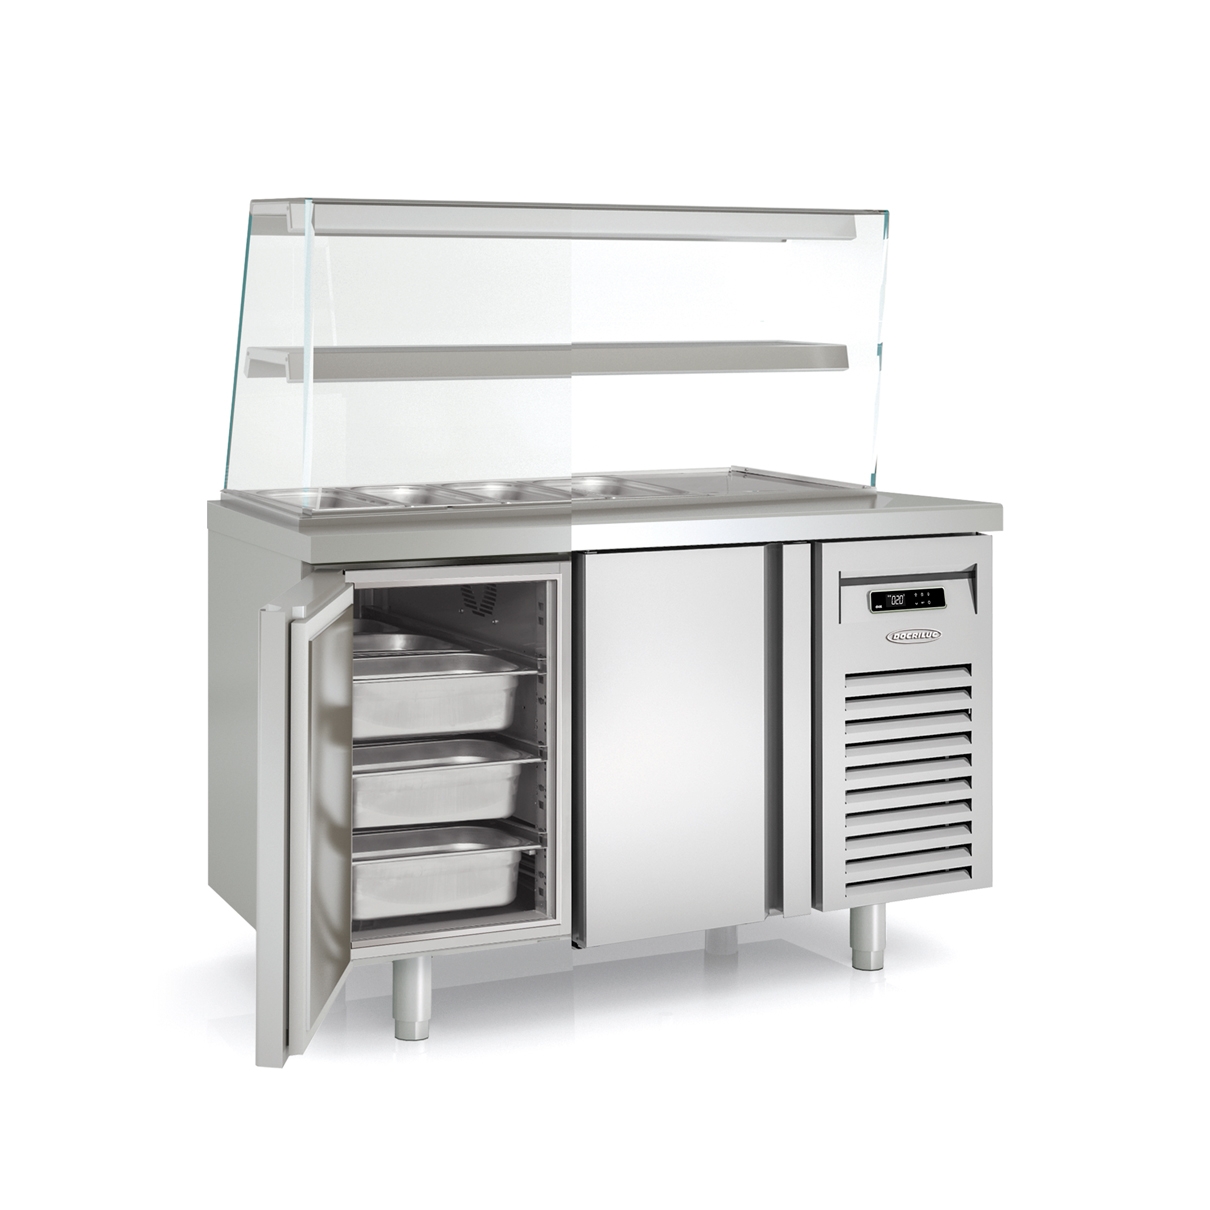 Gastronorm 1/1 Refrigerated Table for Food Preparation DMFK70